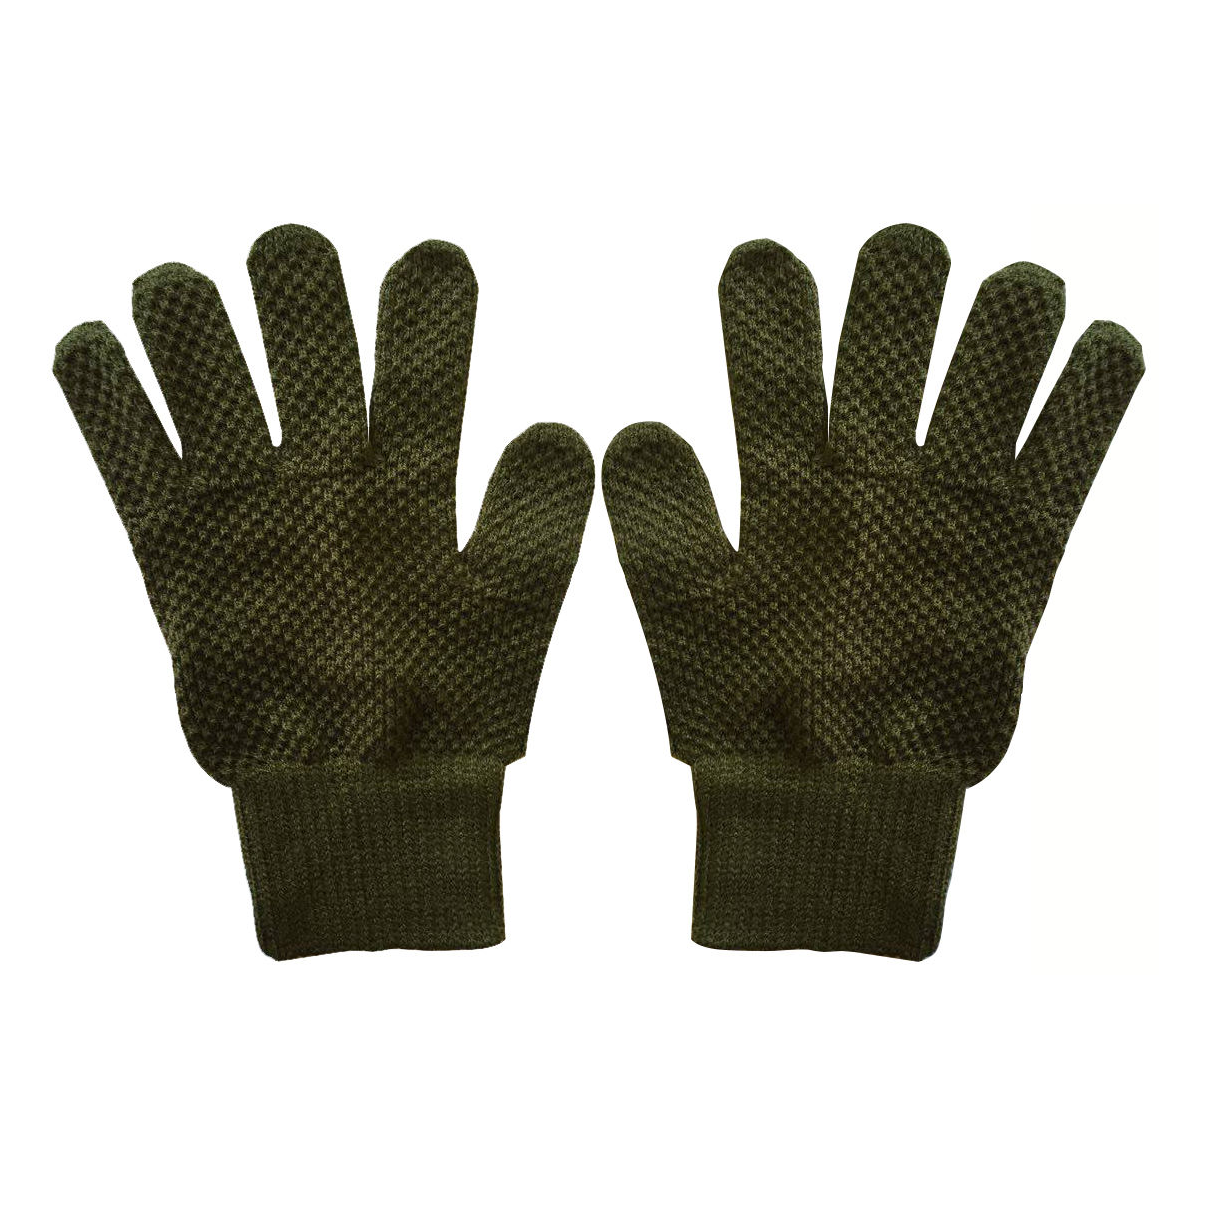 Olive Army Gloves